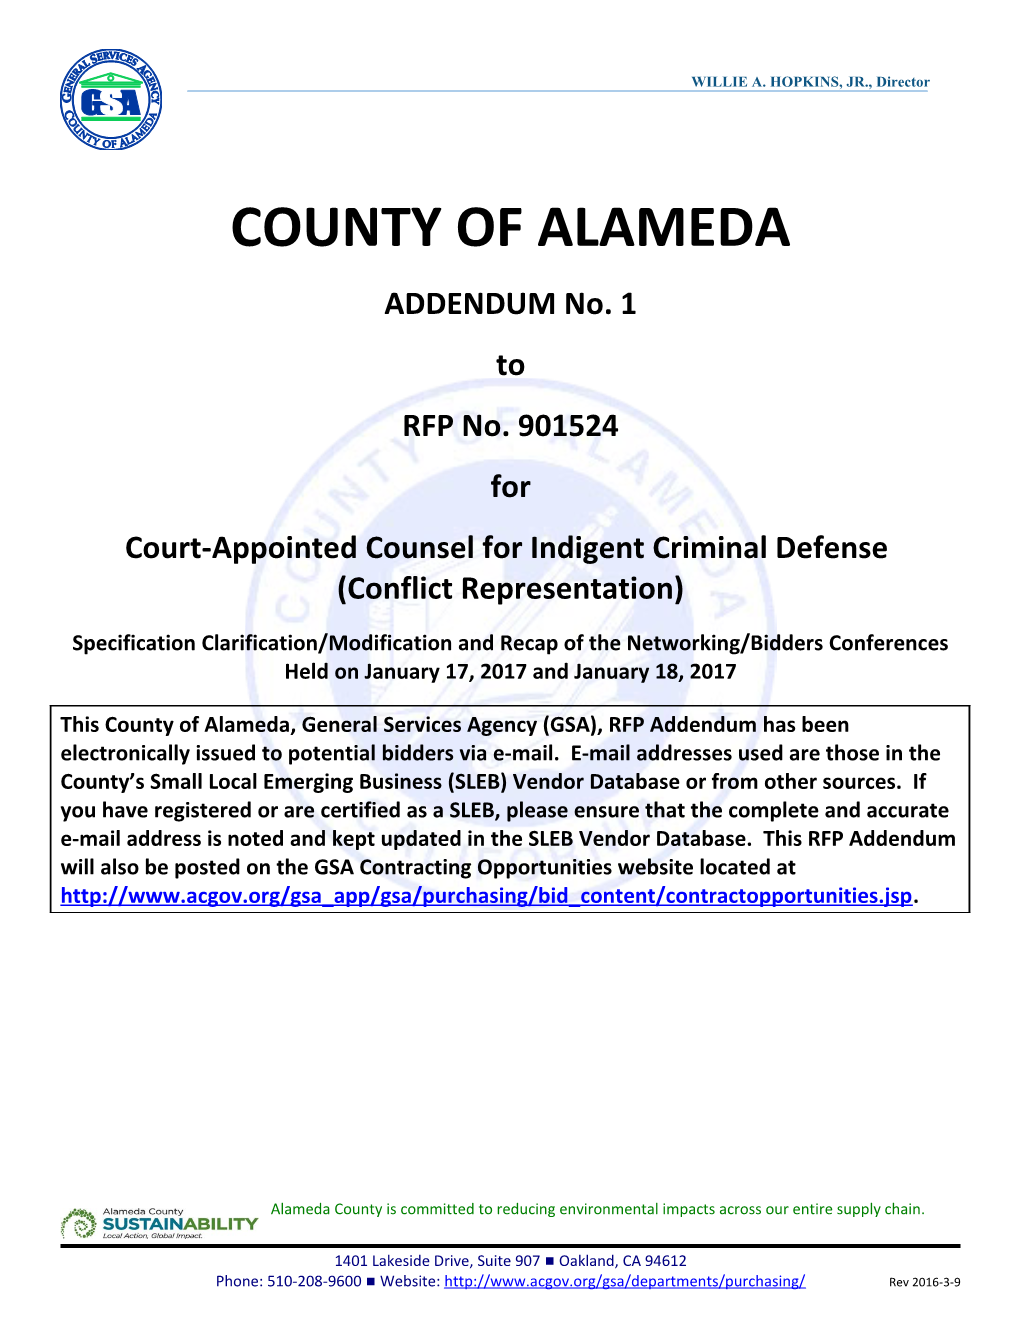 Addenum1 901524 Court-Appointed Counsel Sharepointdraft